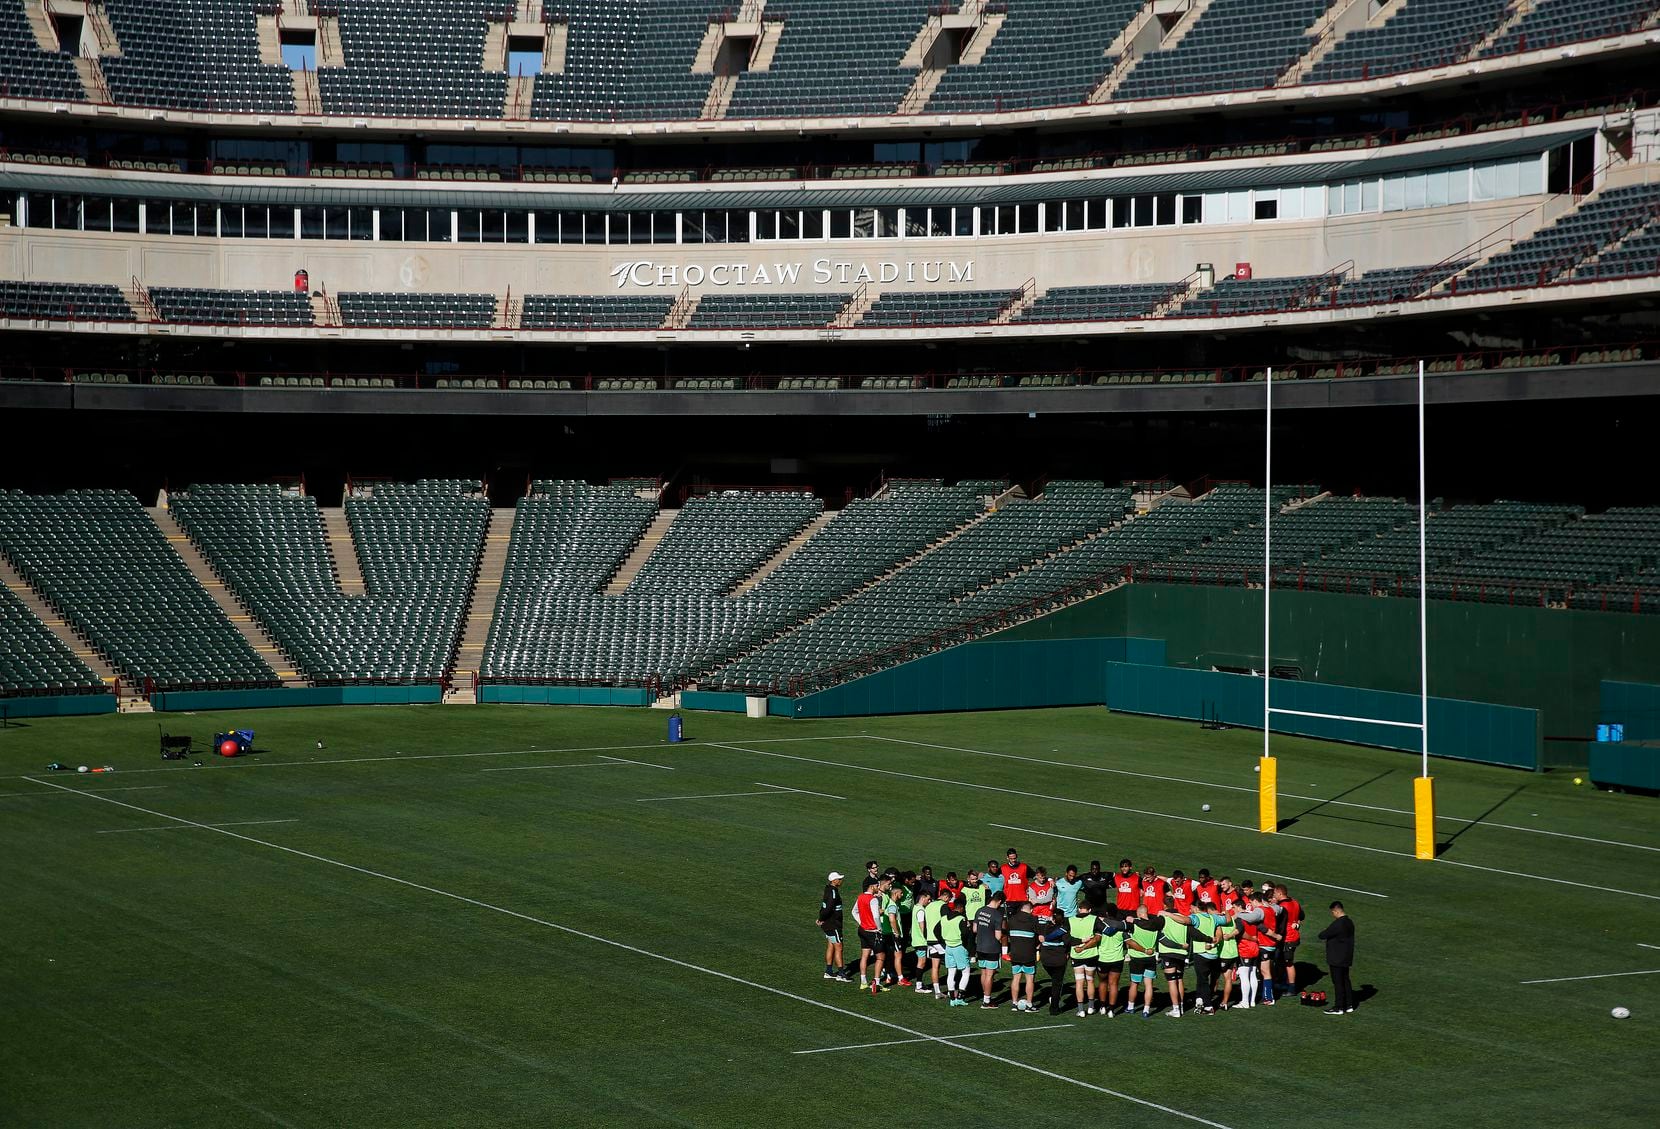 Members of the Dallas Jackals rugby team join arms during a break where they practice and hold games at Choctaw Stadium in Arlington, Texas, Monday, February 7, 2022. The Major League Rugby team are preparing for their first home game at the stadium February 19 against the Houston Saber Cats. 